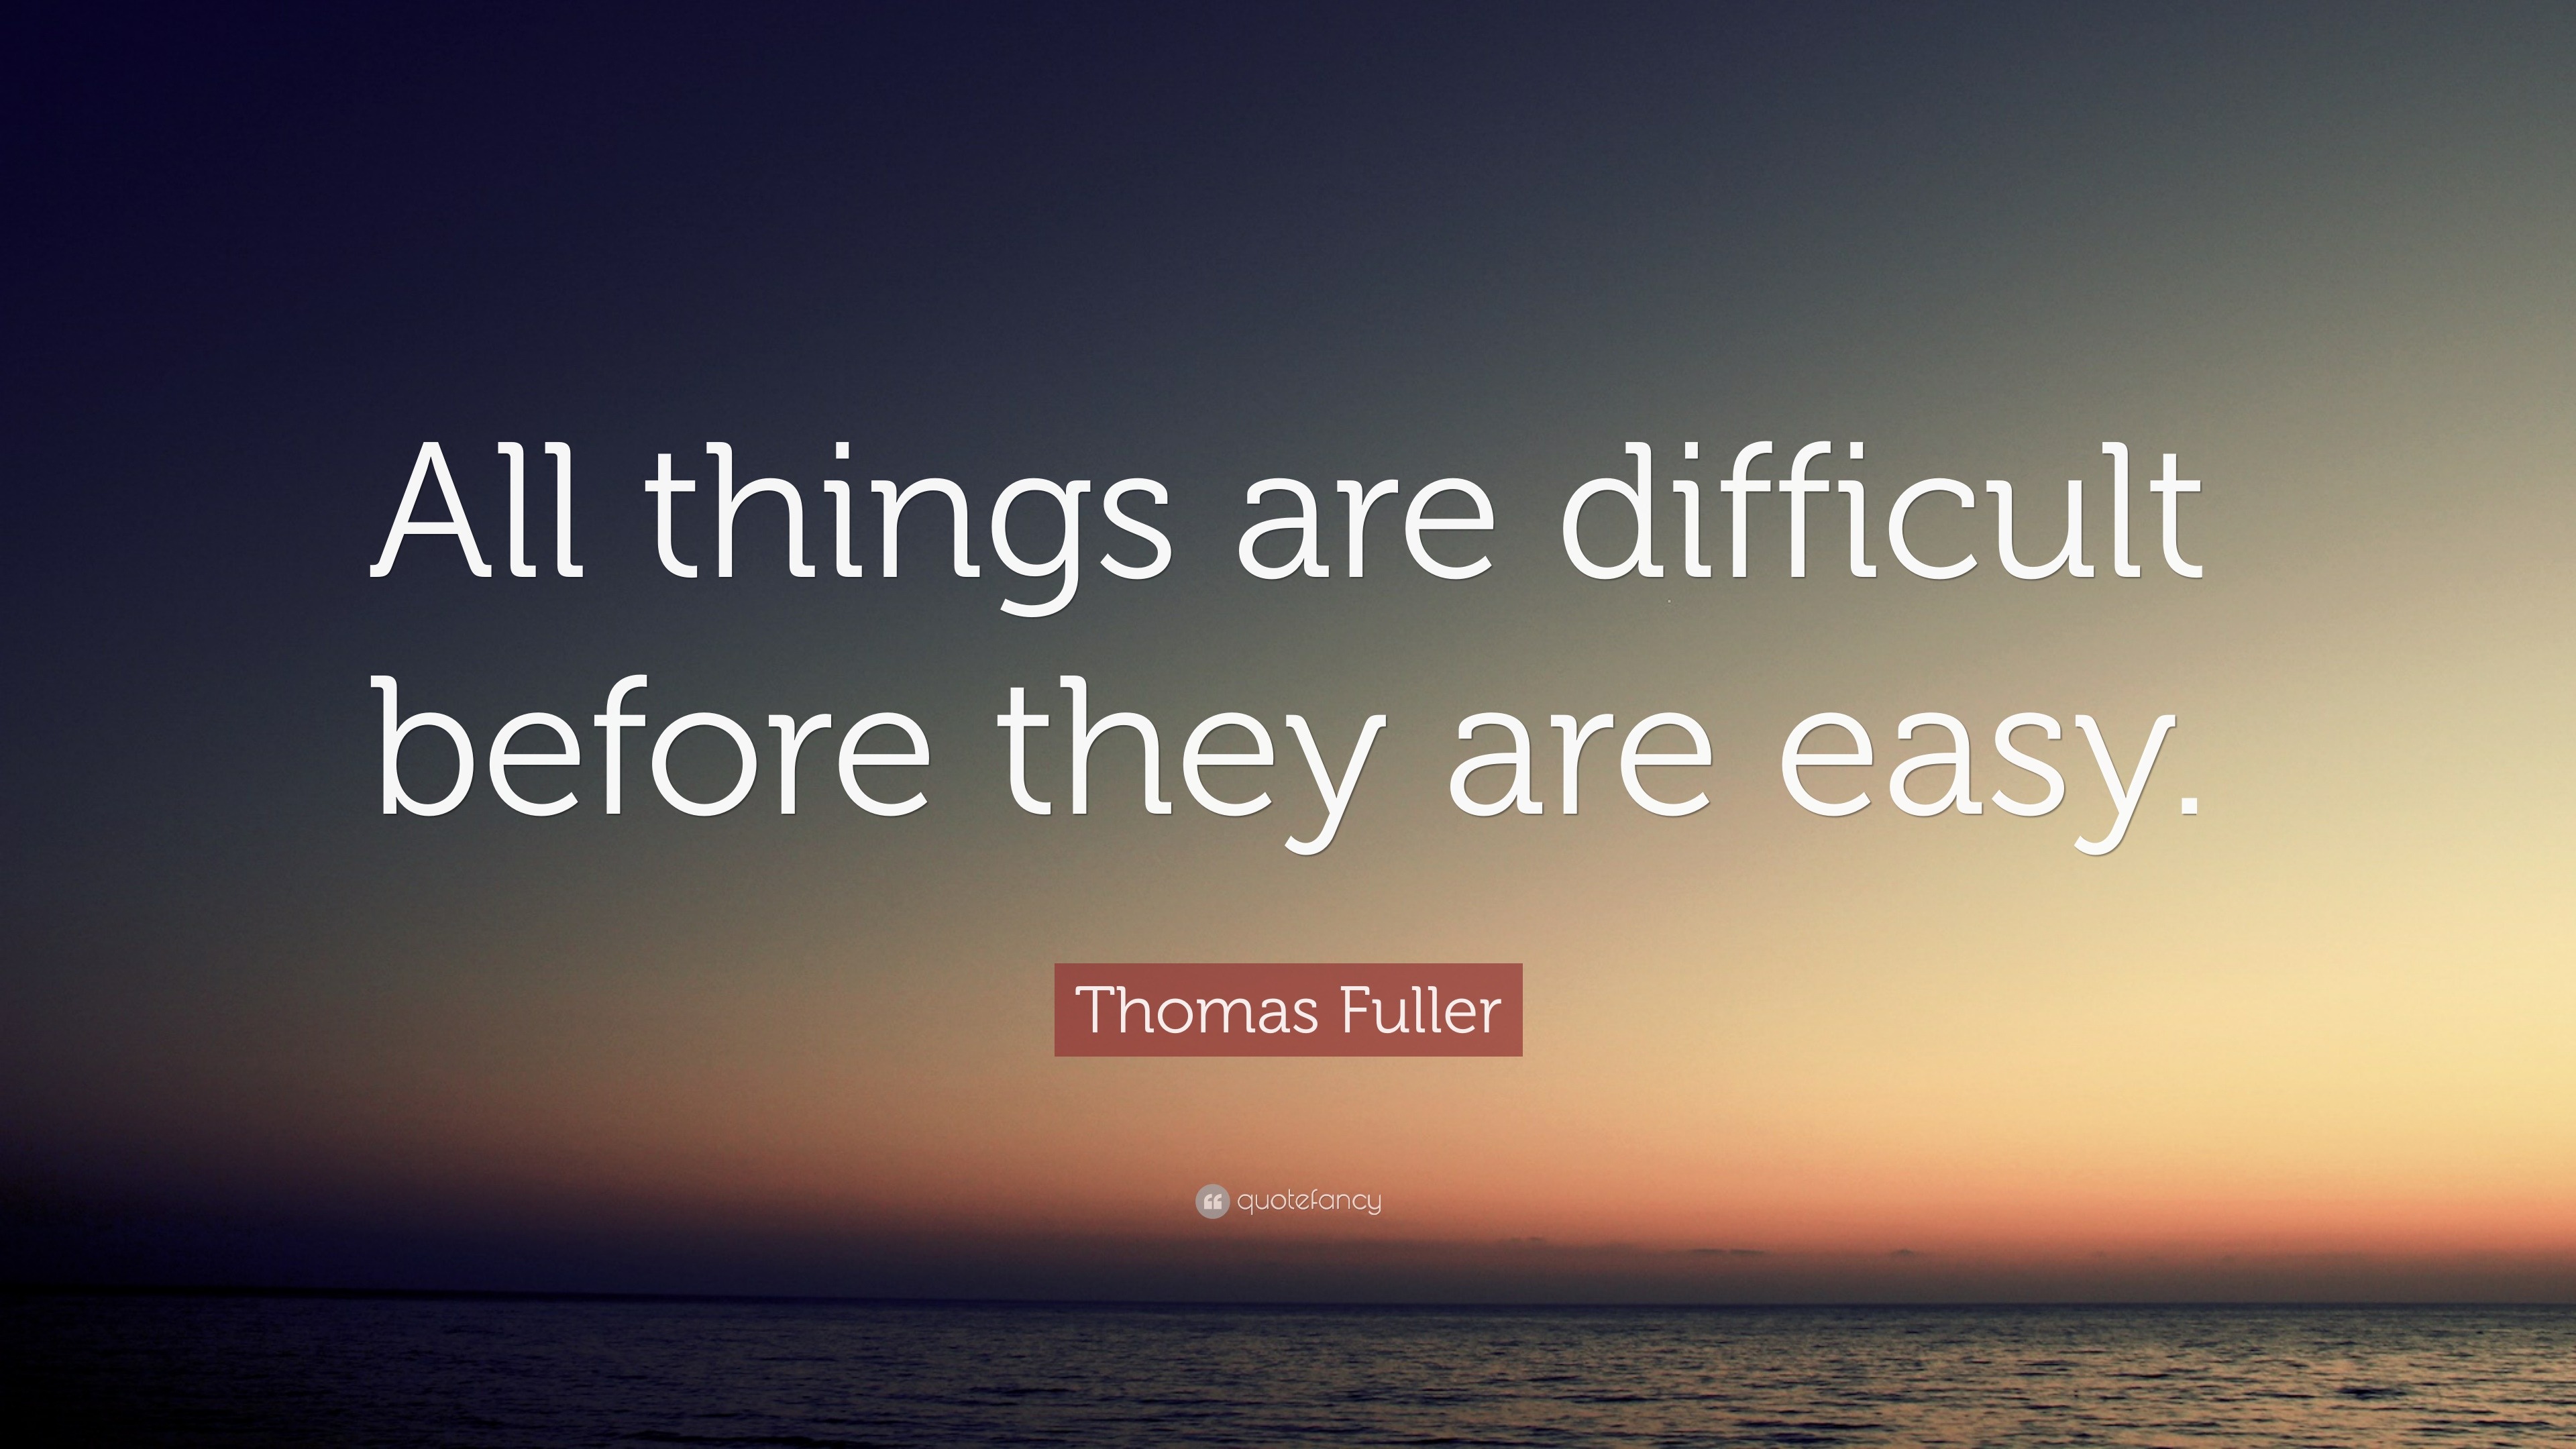 what is the most easy and difficult thing in life